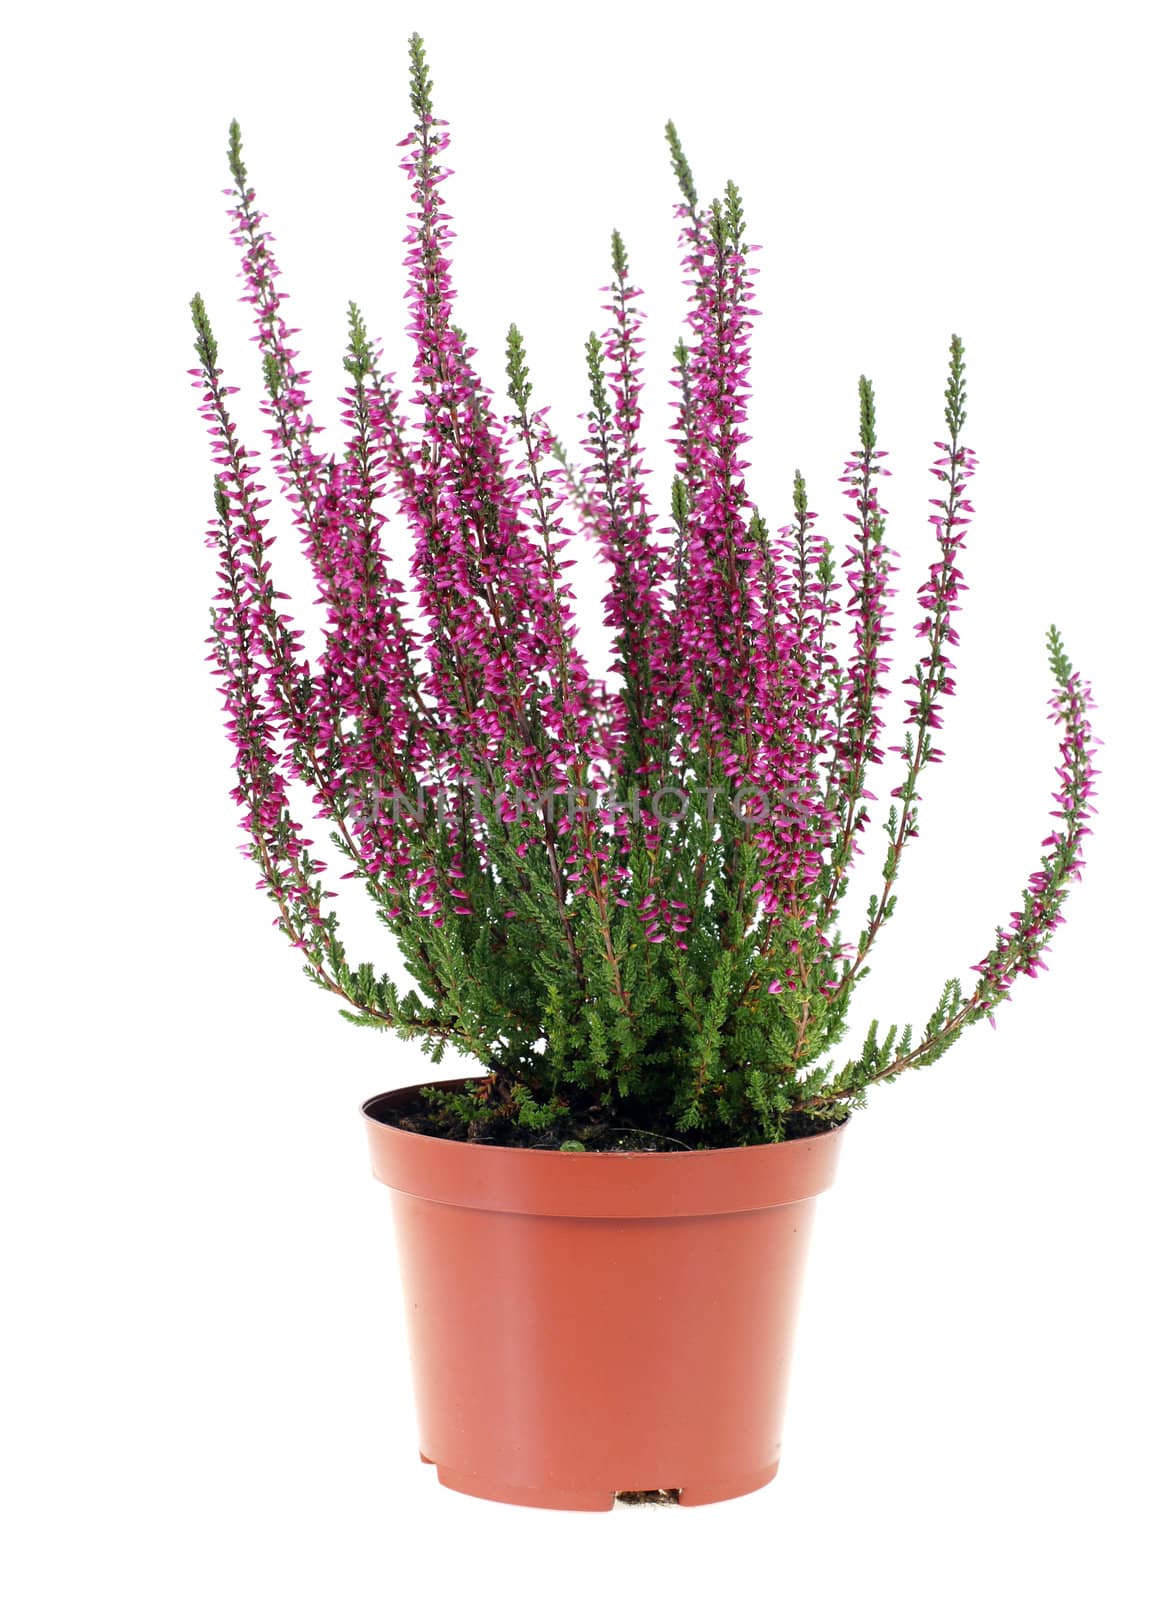 pot of heather in vase isolated on white